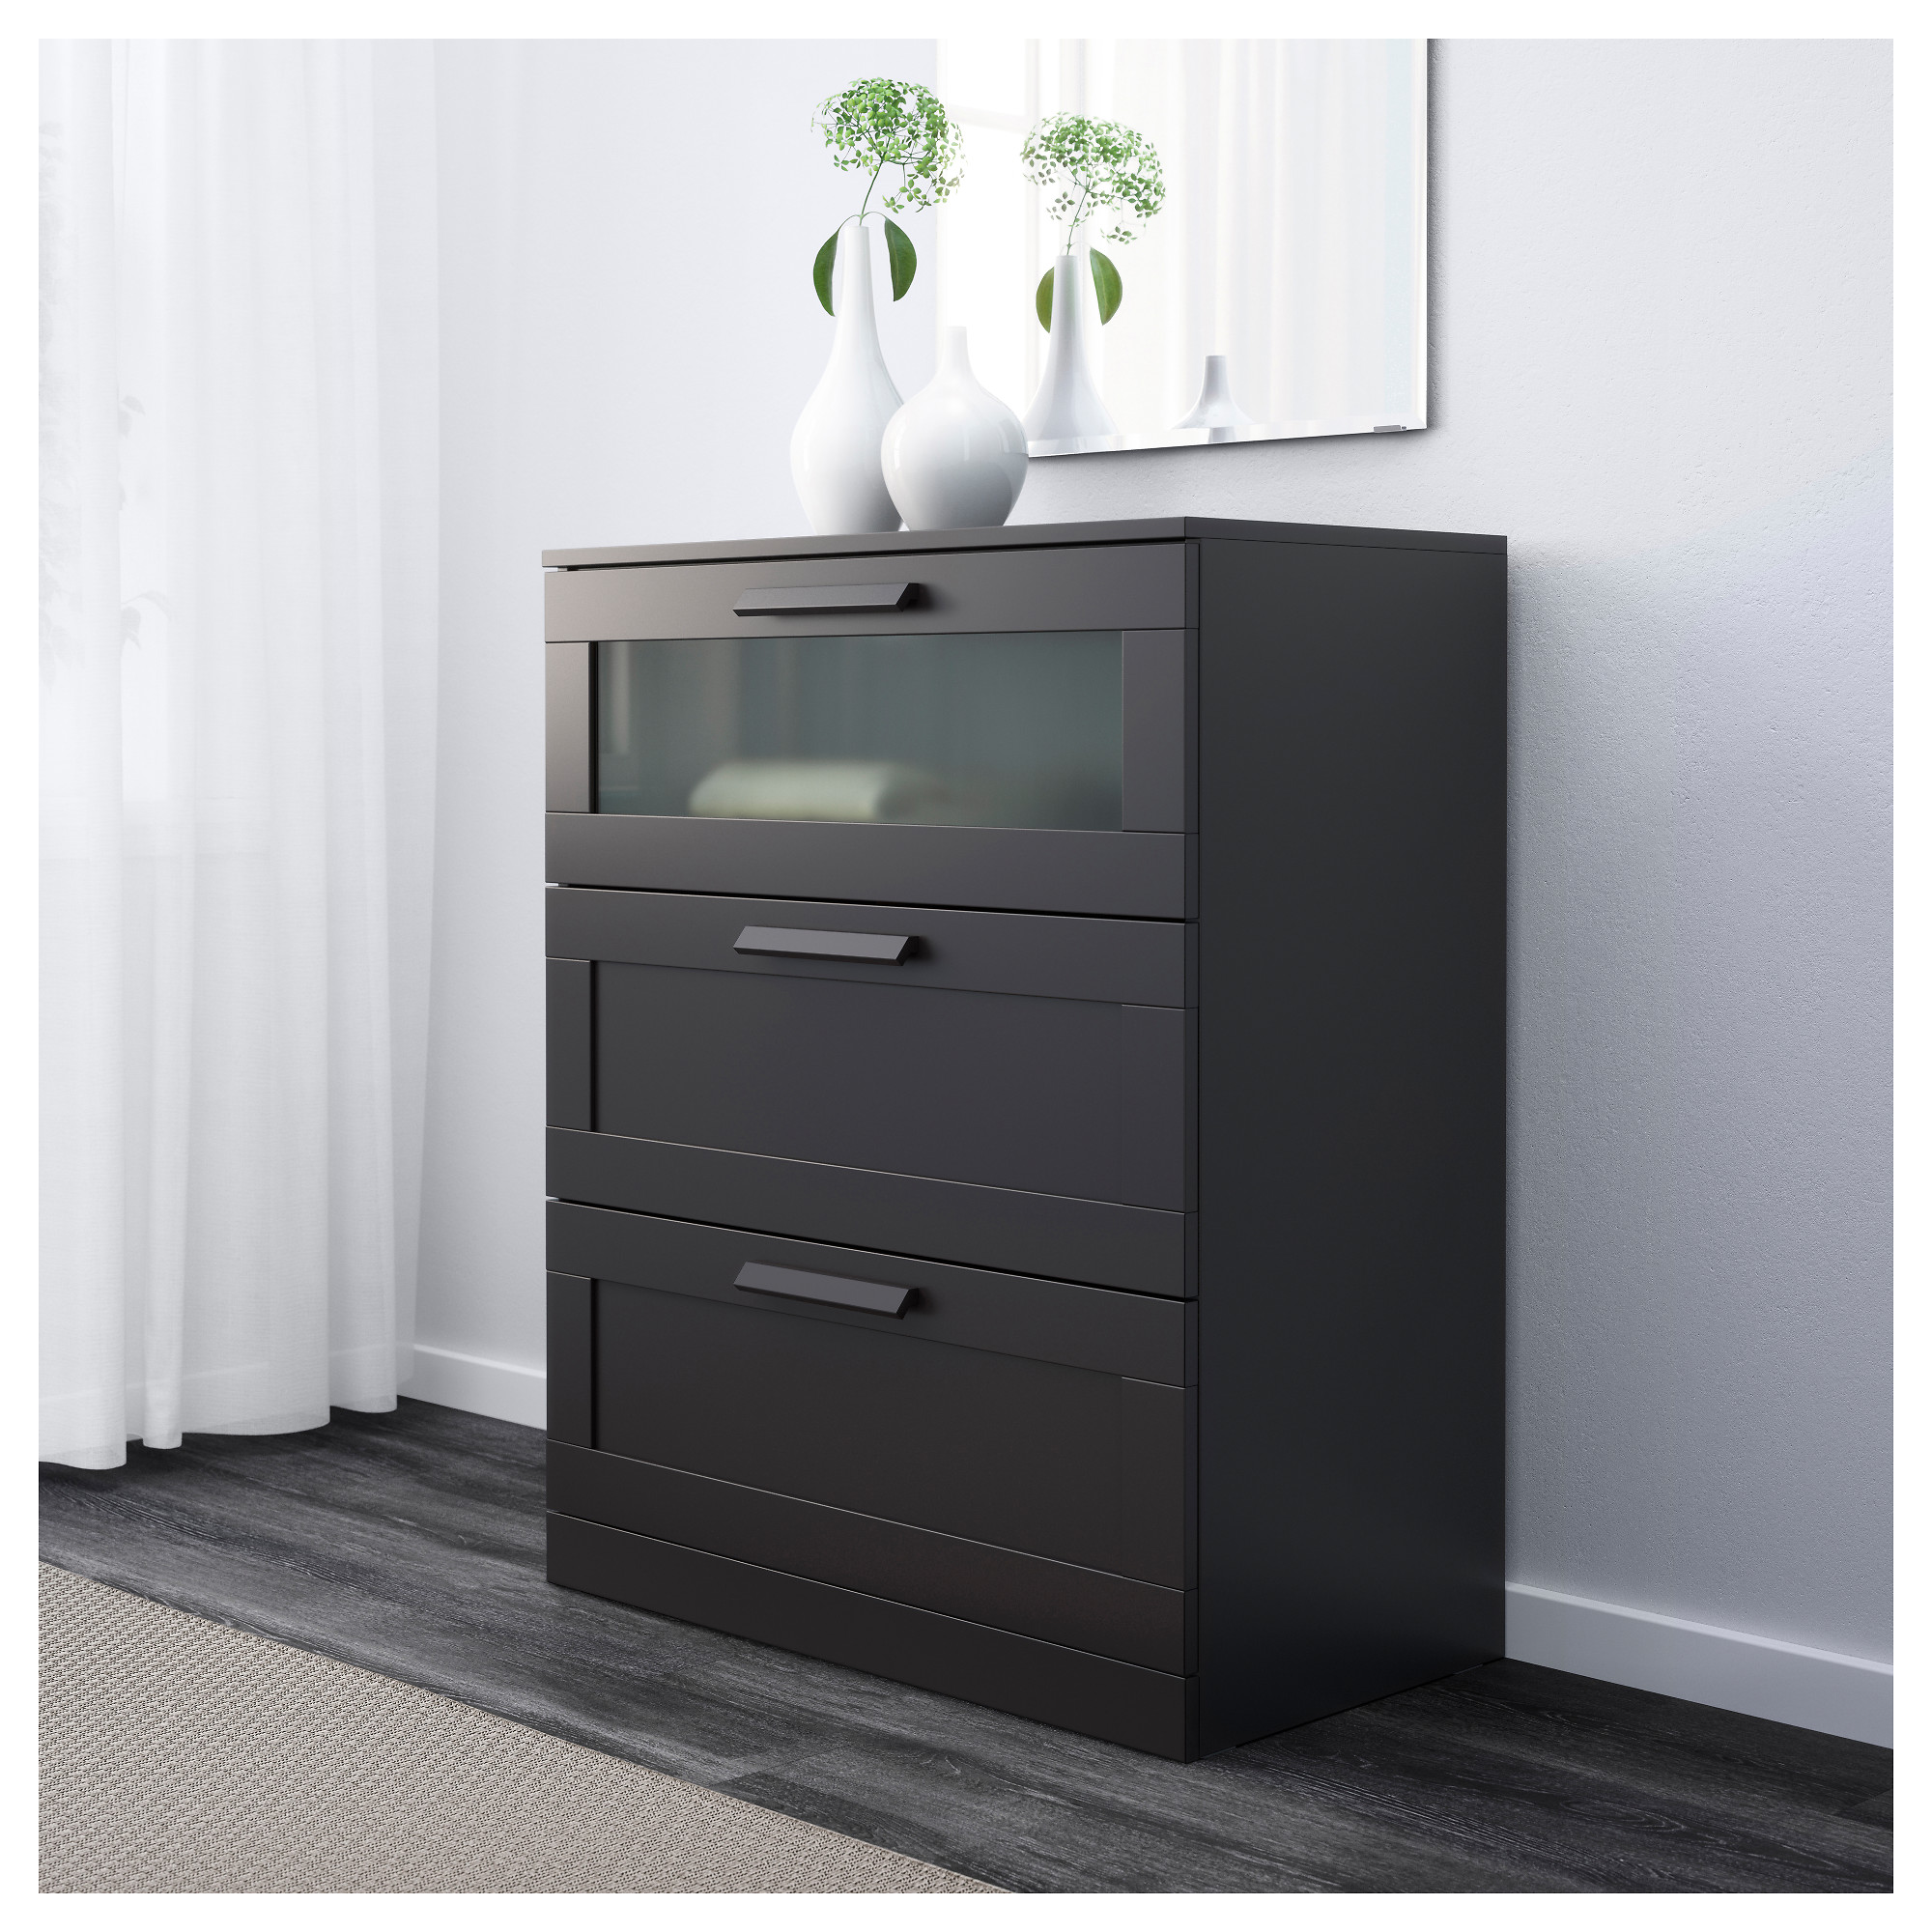 Brimnes Chest Of 3 Drawers Black Frosted Glass Ikea Hong Kong